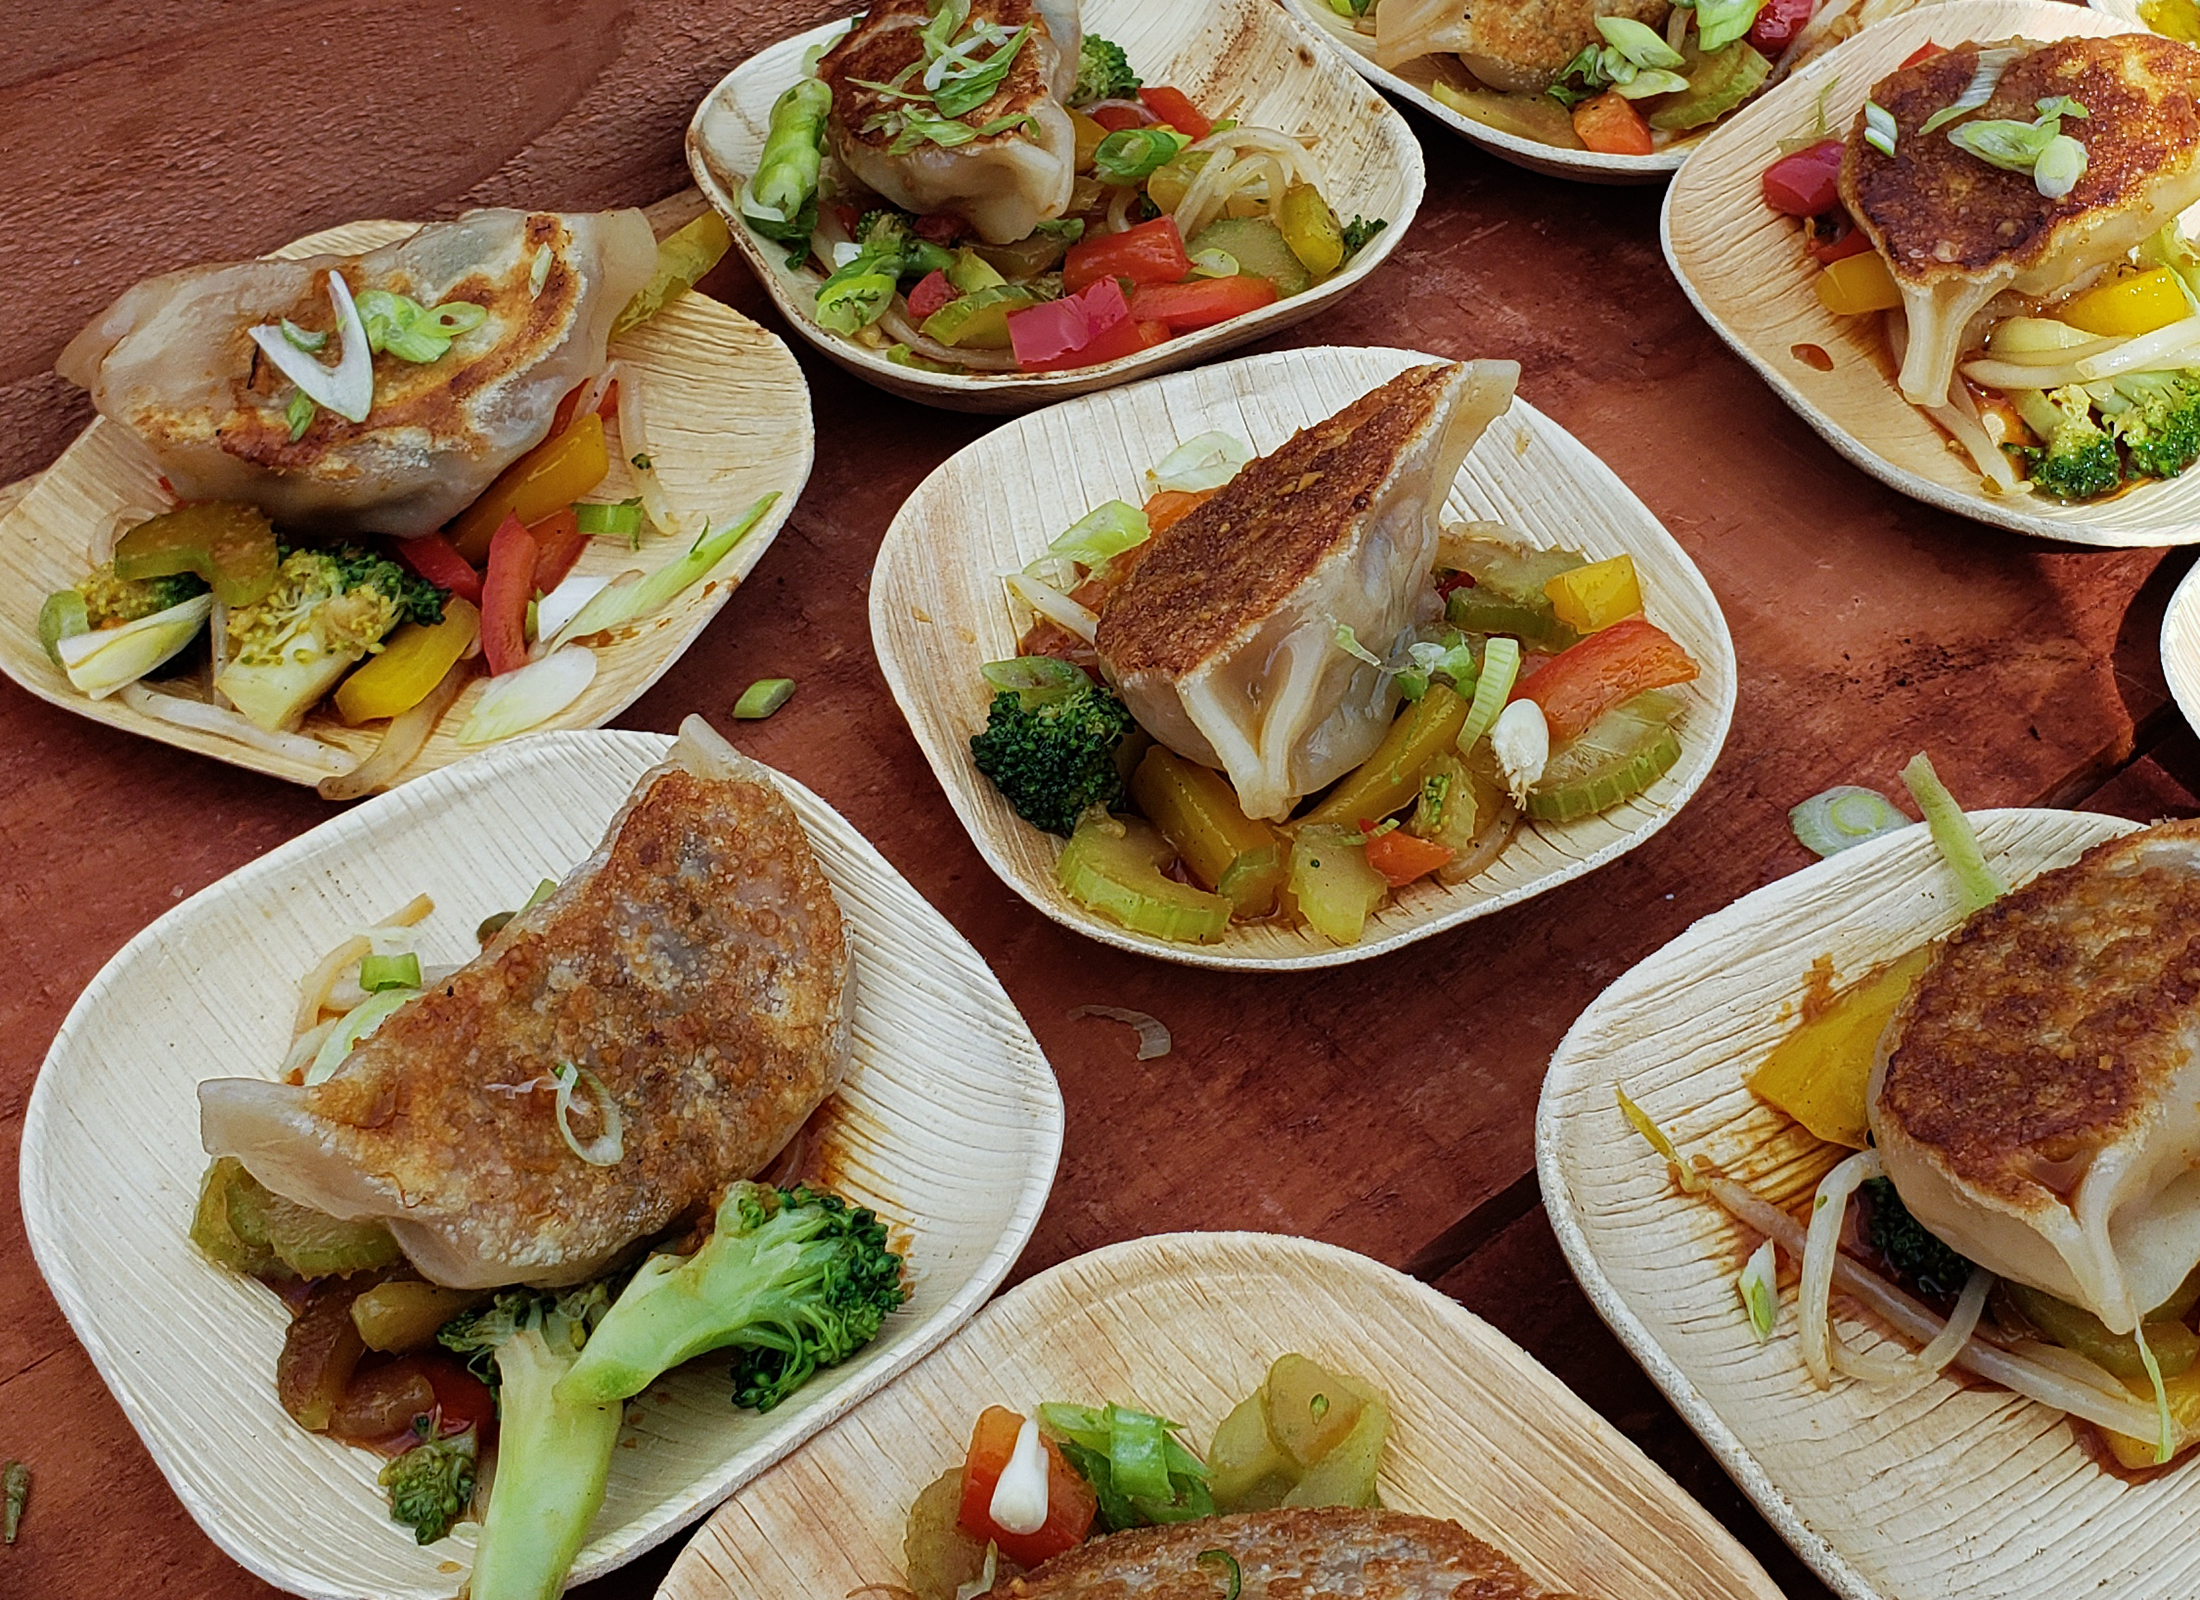 Pork belly potstickers at Taste of Sonoma 2018 at the Green Music Center. Heather Irwin/PD